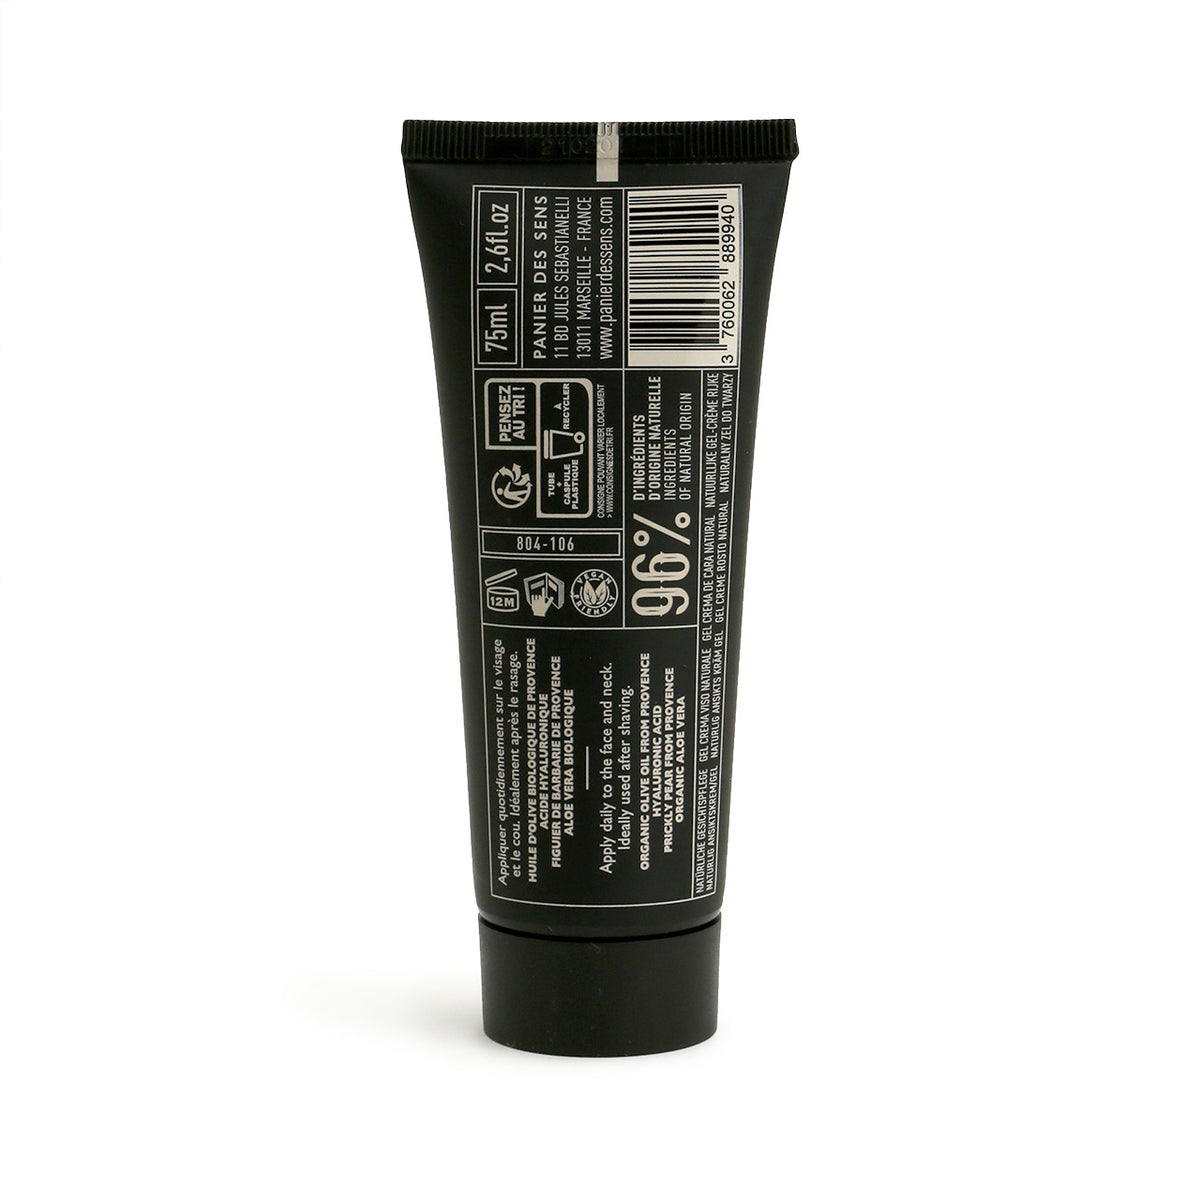 back of the face gel cream tube showing specifications - 96%ingredients of natural origin